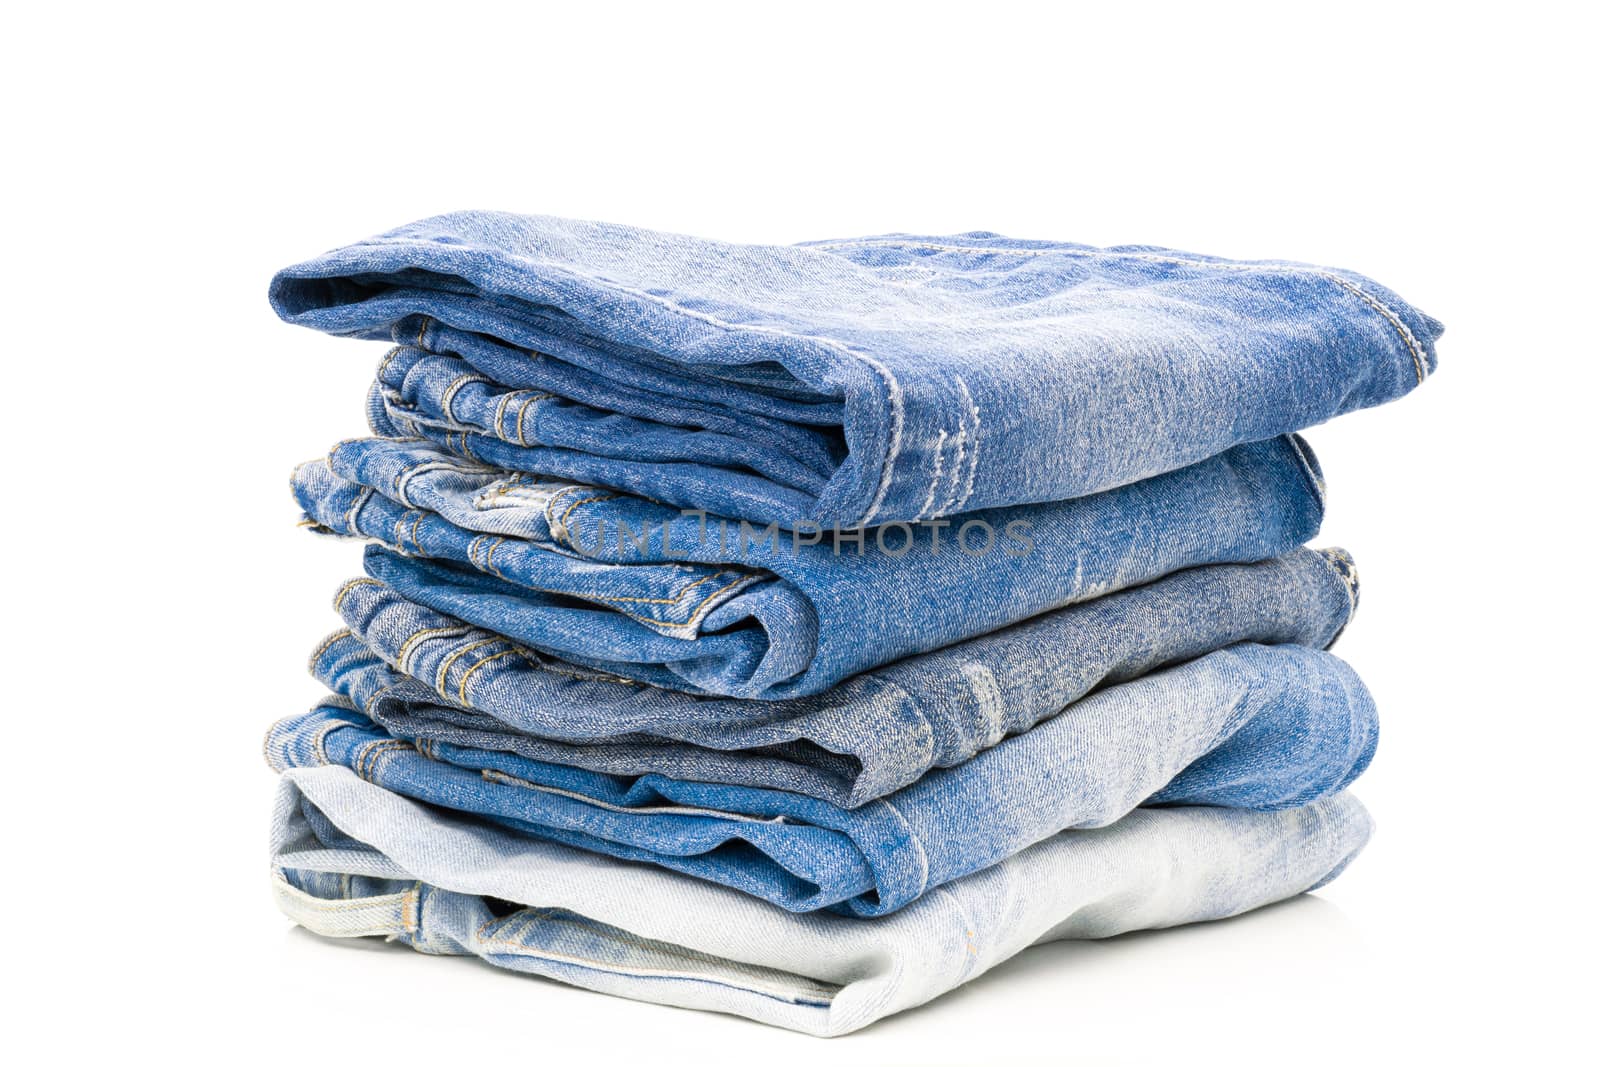 Jeans fold many on the white background by sompongtom